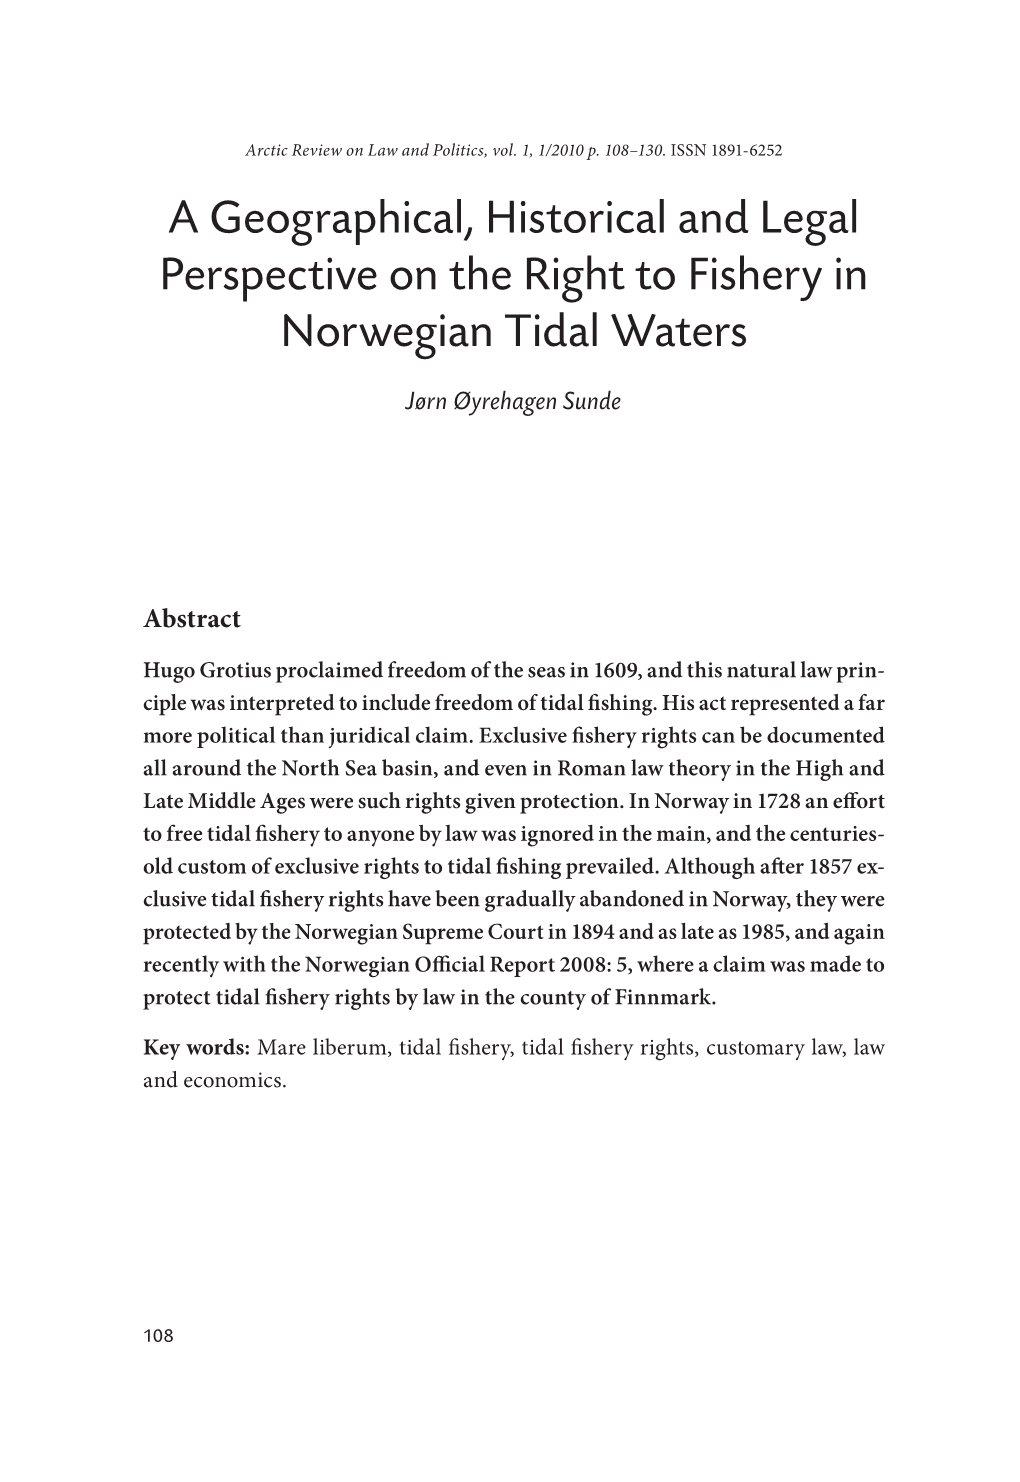 A Geographical, Historical and Legal Perspective on the Right to Fishery in Norwegian Tidal Waters